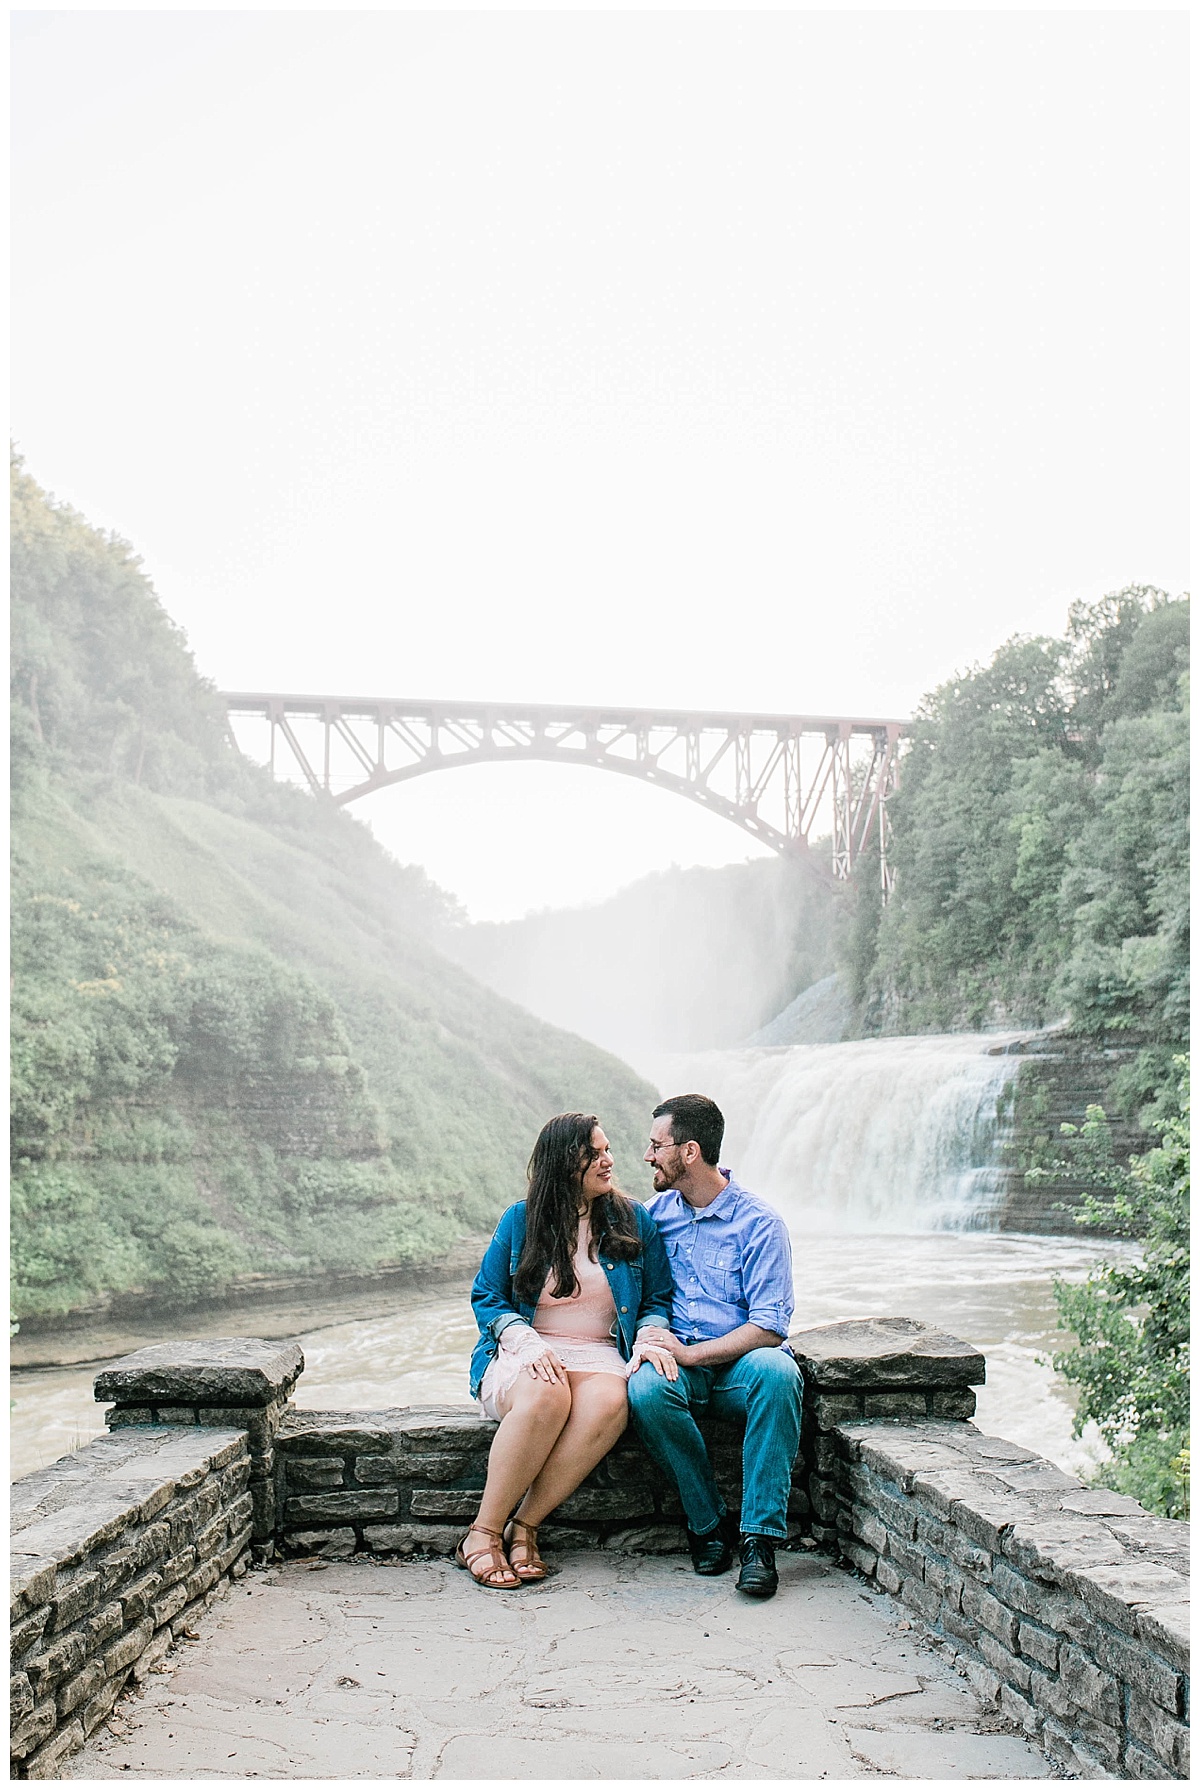 Amanda and Justin - Letchworth state Park engagement photos - Lass and Beau-4106.jpg